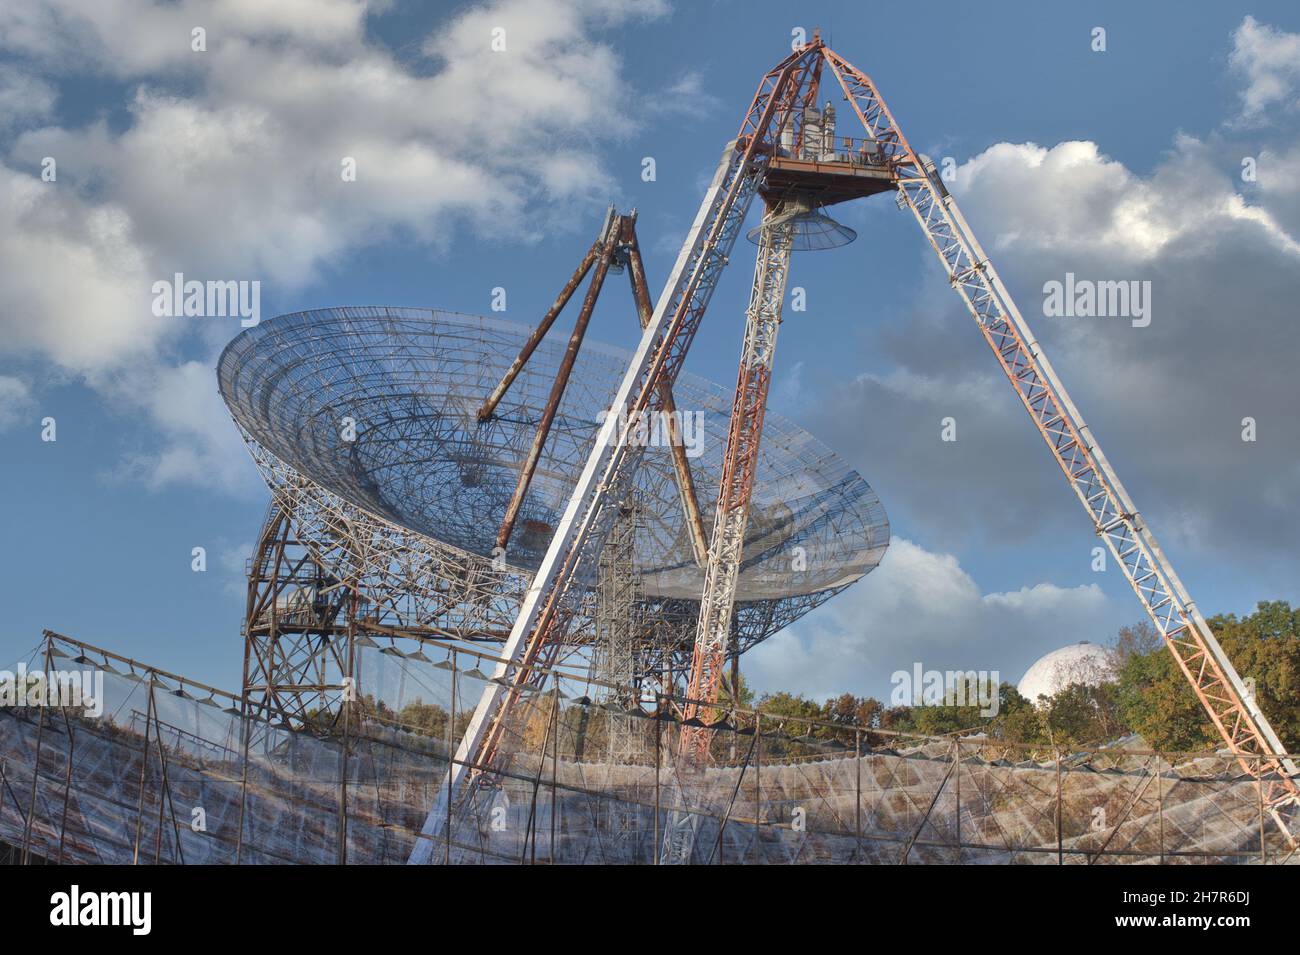 Scatter radar installation at MIT Haystack Observatory in Massachusetts. Upward-pointing antenna and radar dish are used to study the ionosphere. Stock Photo